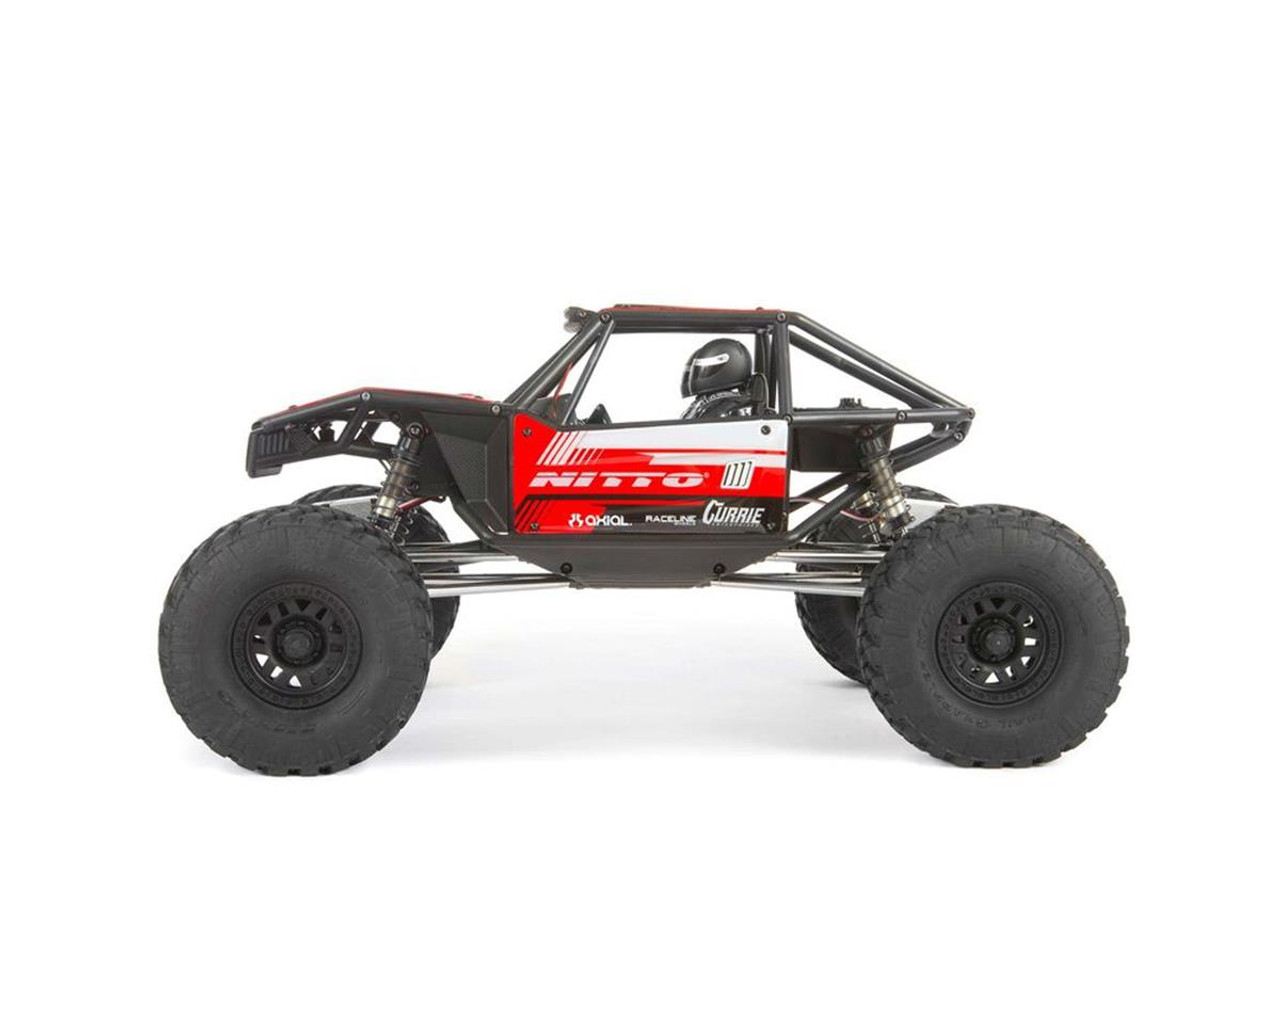 Axial 1/10 Capra 1.9 4WS Unlimited Trail Buggy RTR, Nitto, Black